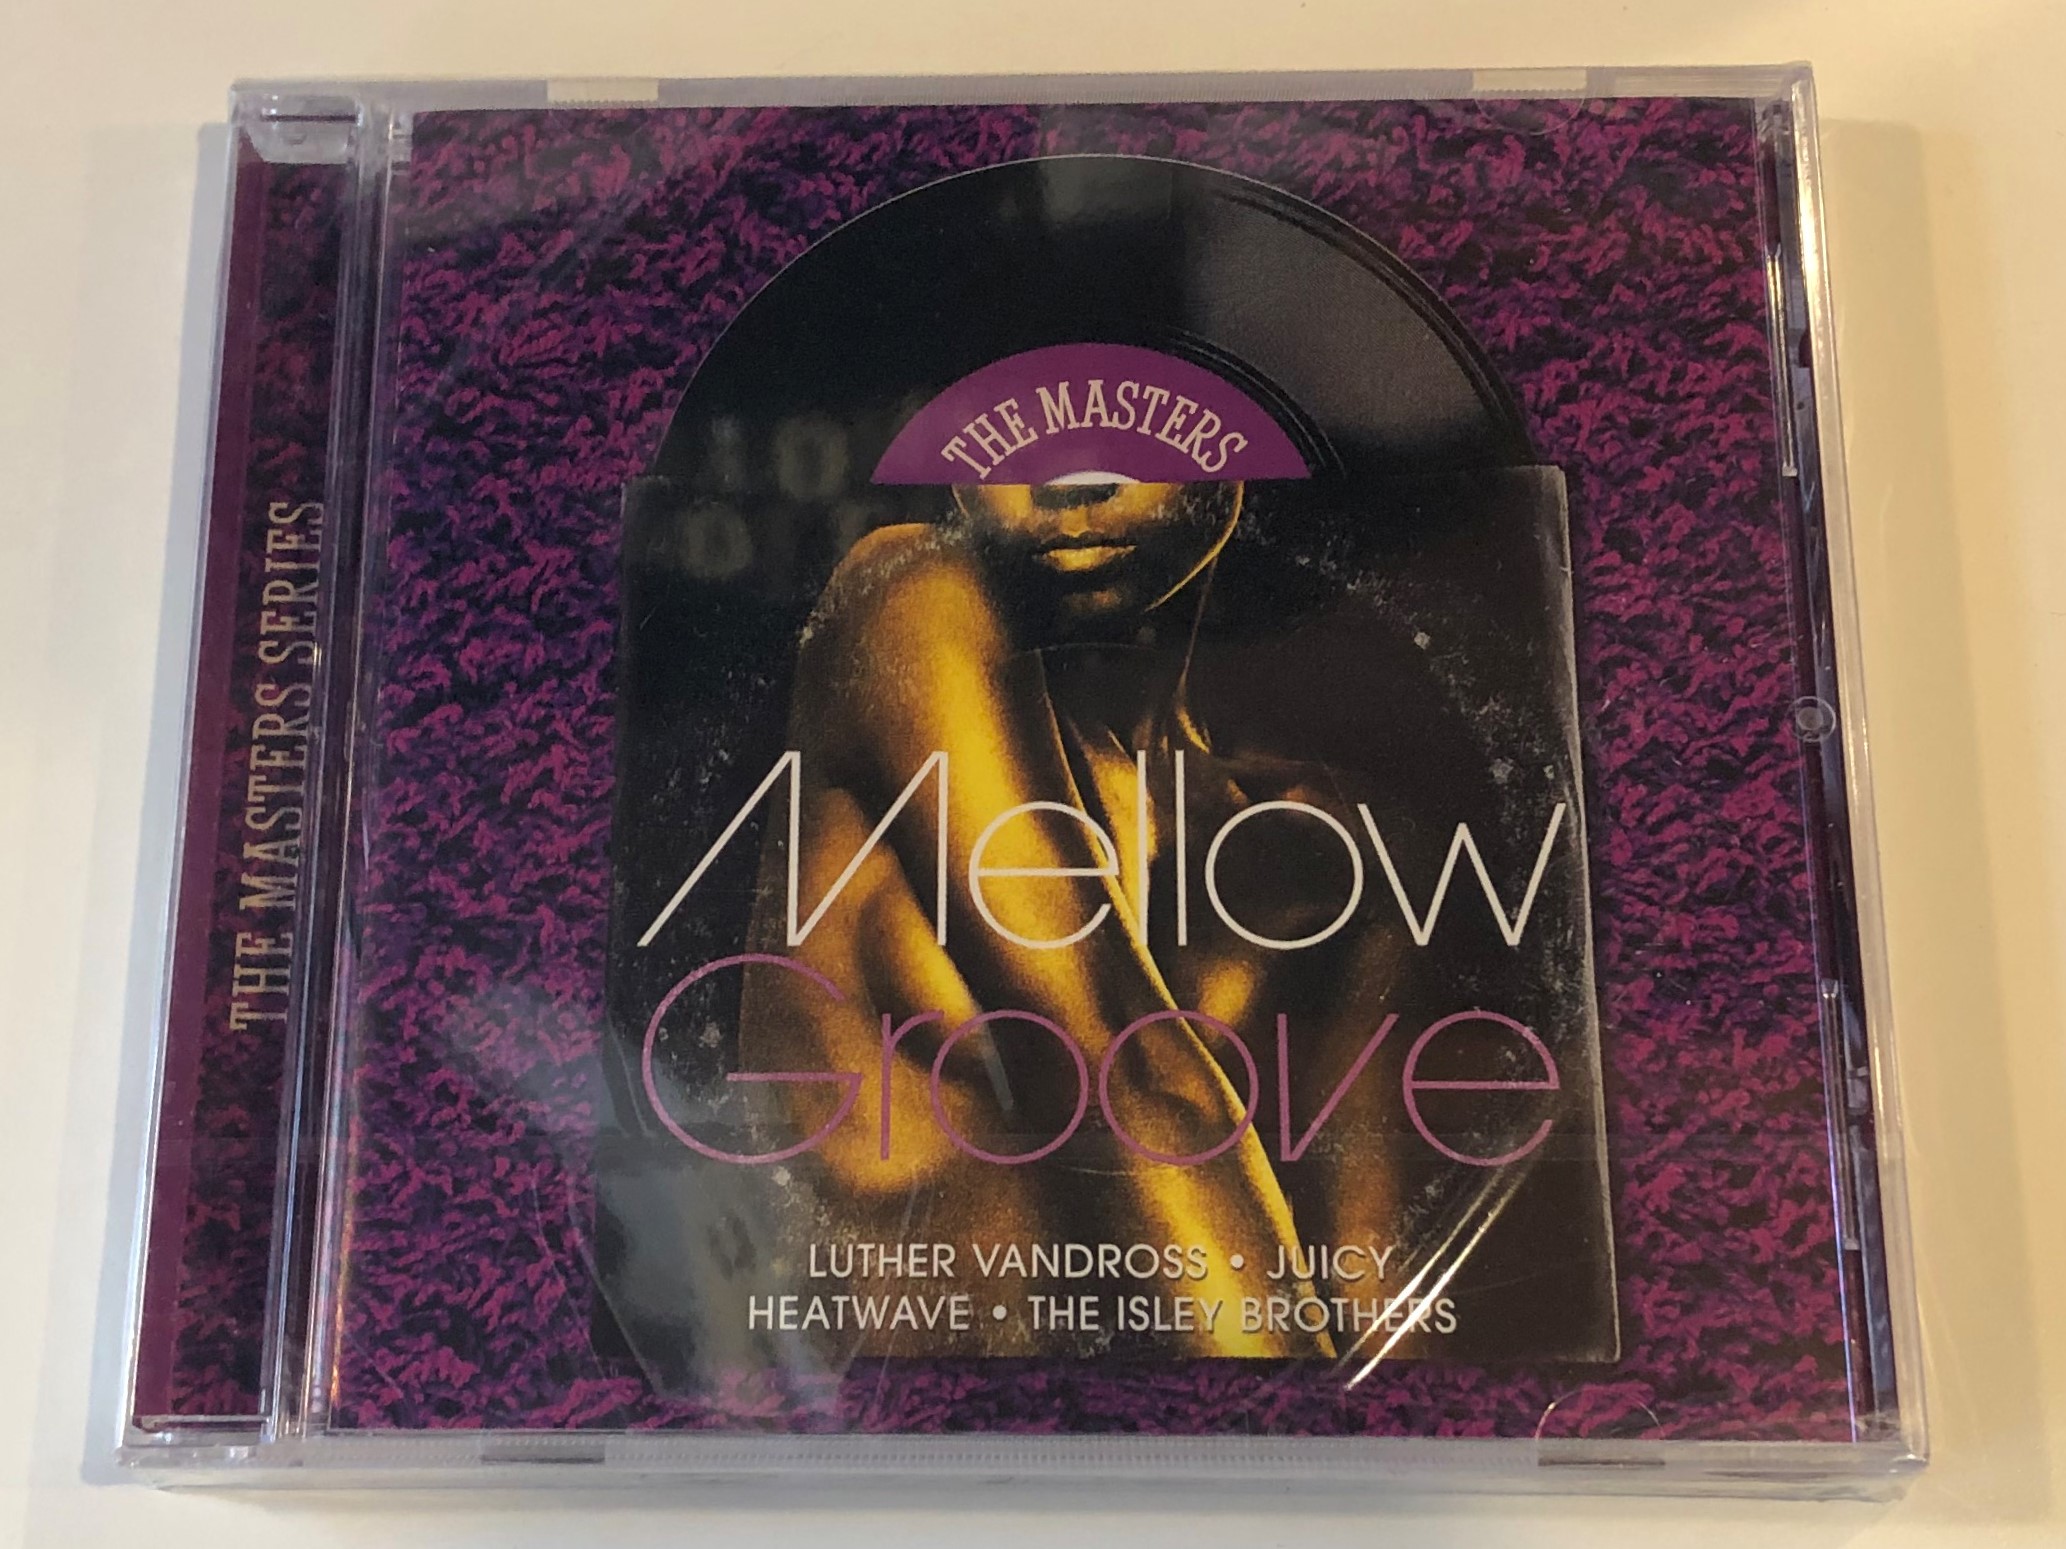 the-masters-mellow-groove-luther-vandross-juicy-heatwave-the-isley-brothers-the-masters-series-sony-music-audio-cd-2009-88697508812-1-.jpg